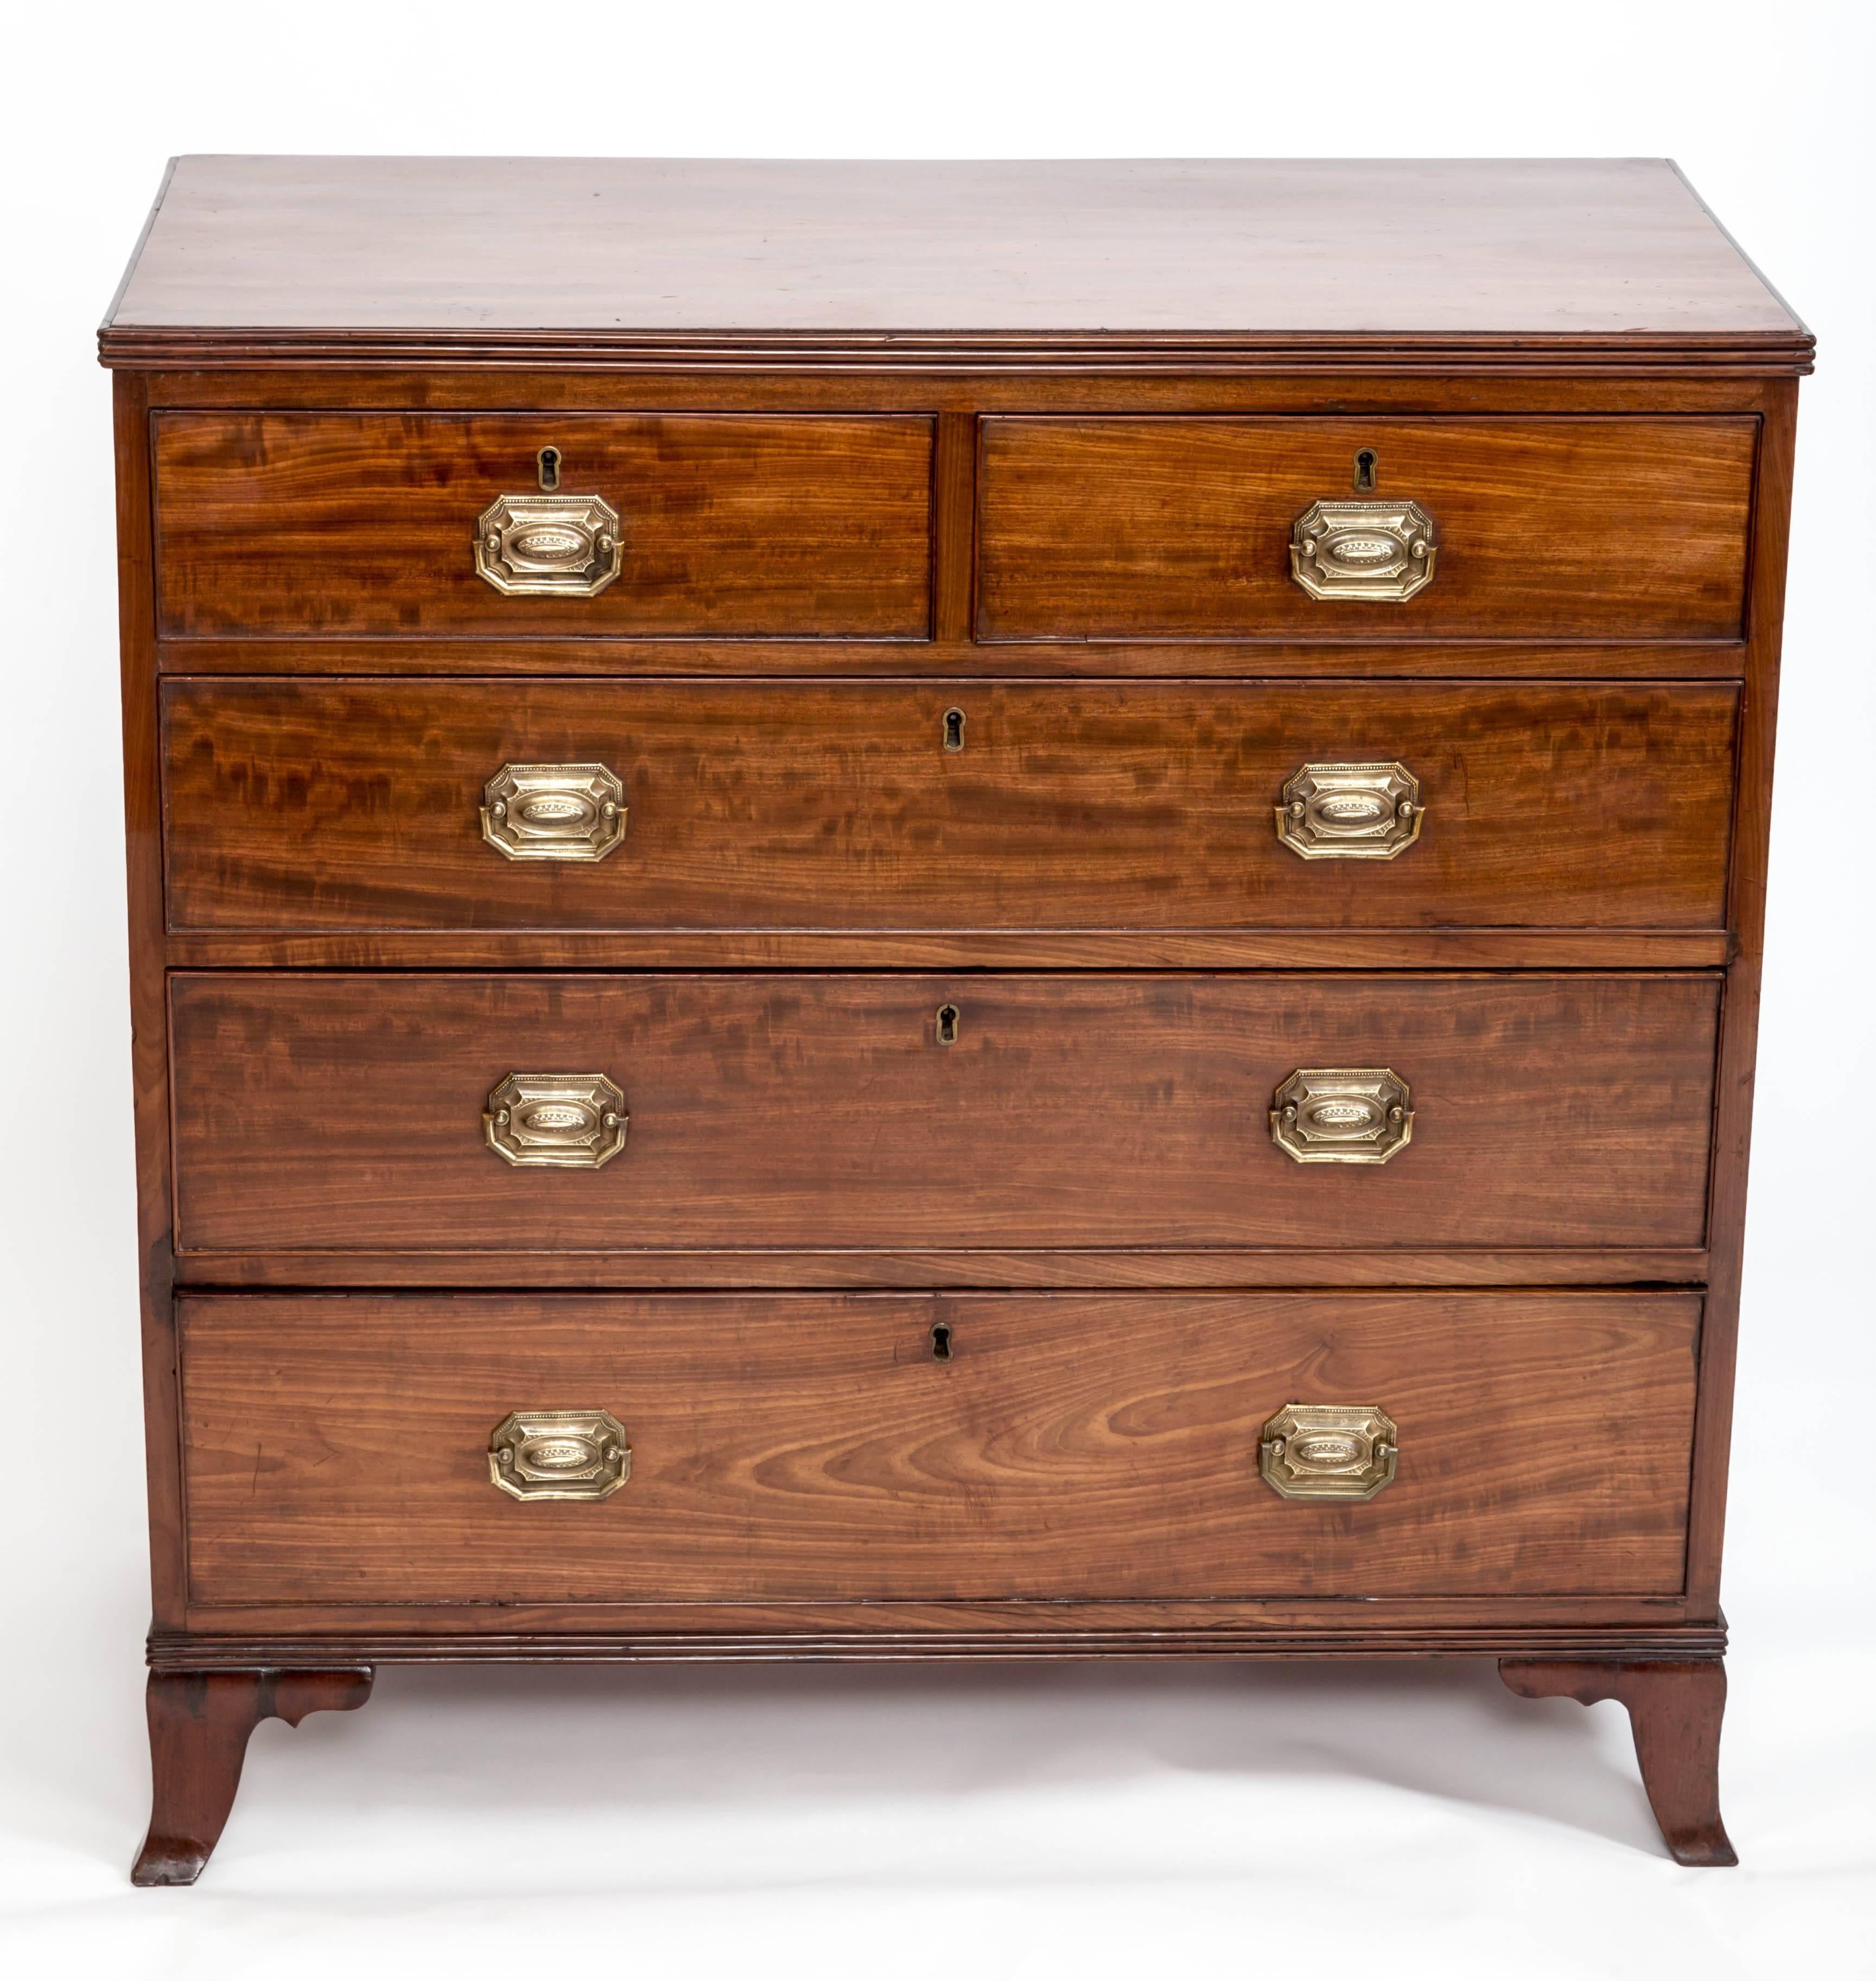 A handsome five-drawer mahogany chest (two short, over three long), reeded top, sprayed legs, original brass pulls.